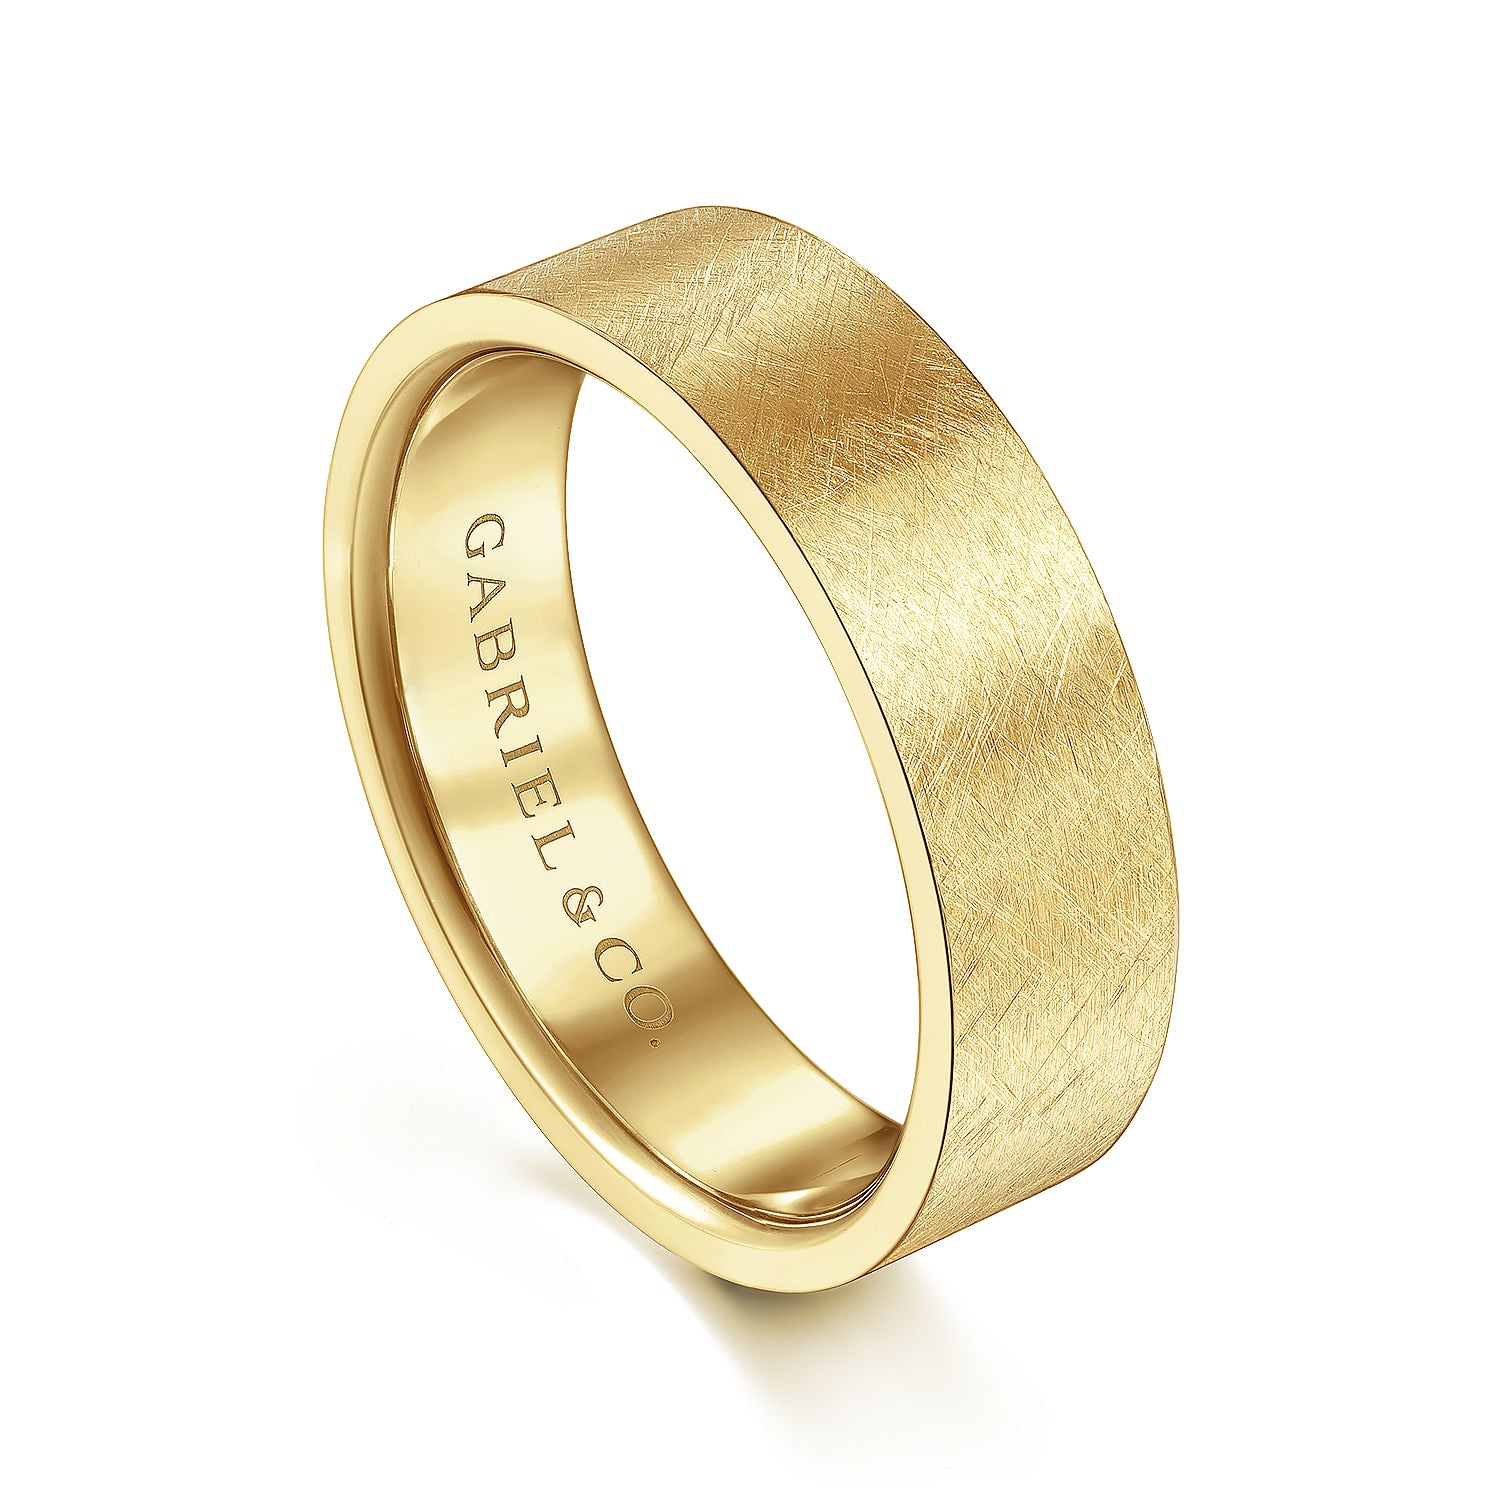 Gabriel & Co Yellow Gold Wedding Band With A Brushed Finish - Gold Wedding Bands - Men's